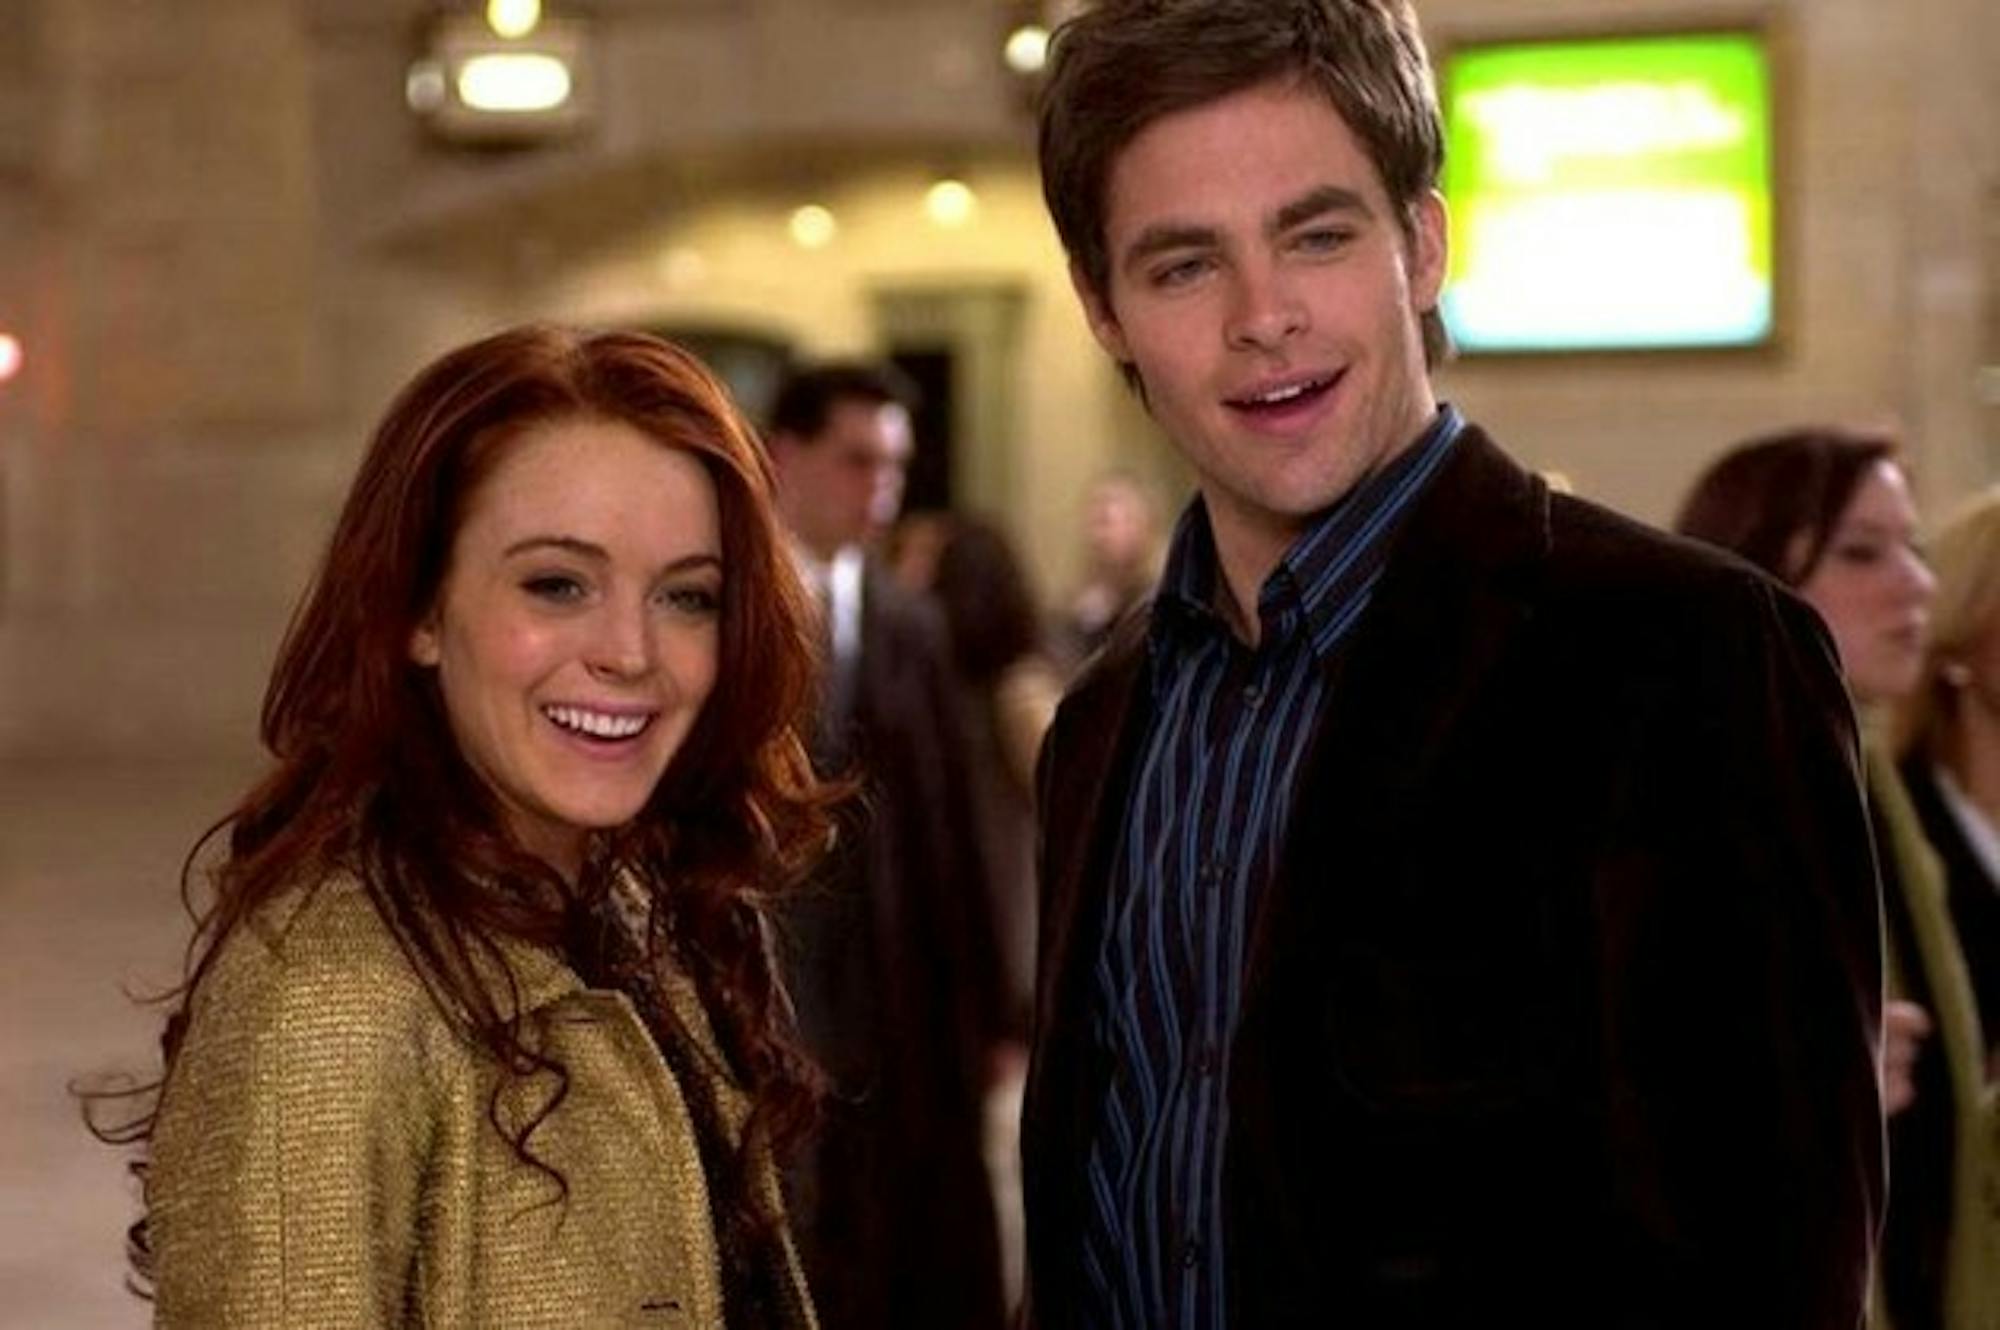 Lindsay Lohan and Chris Pine swap fortunes in 